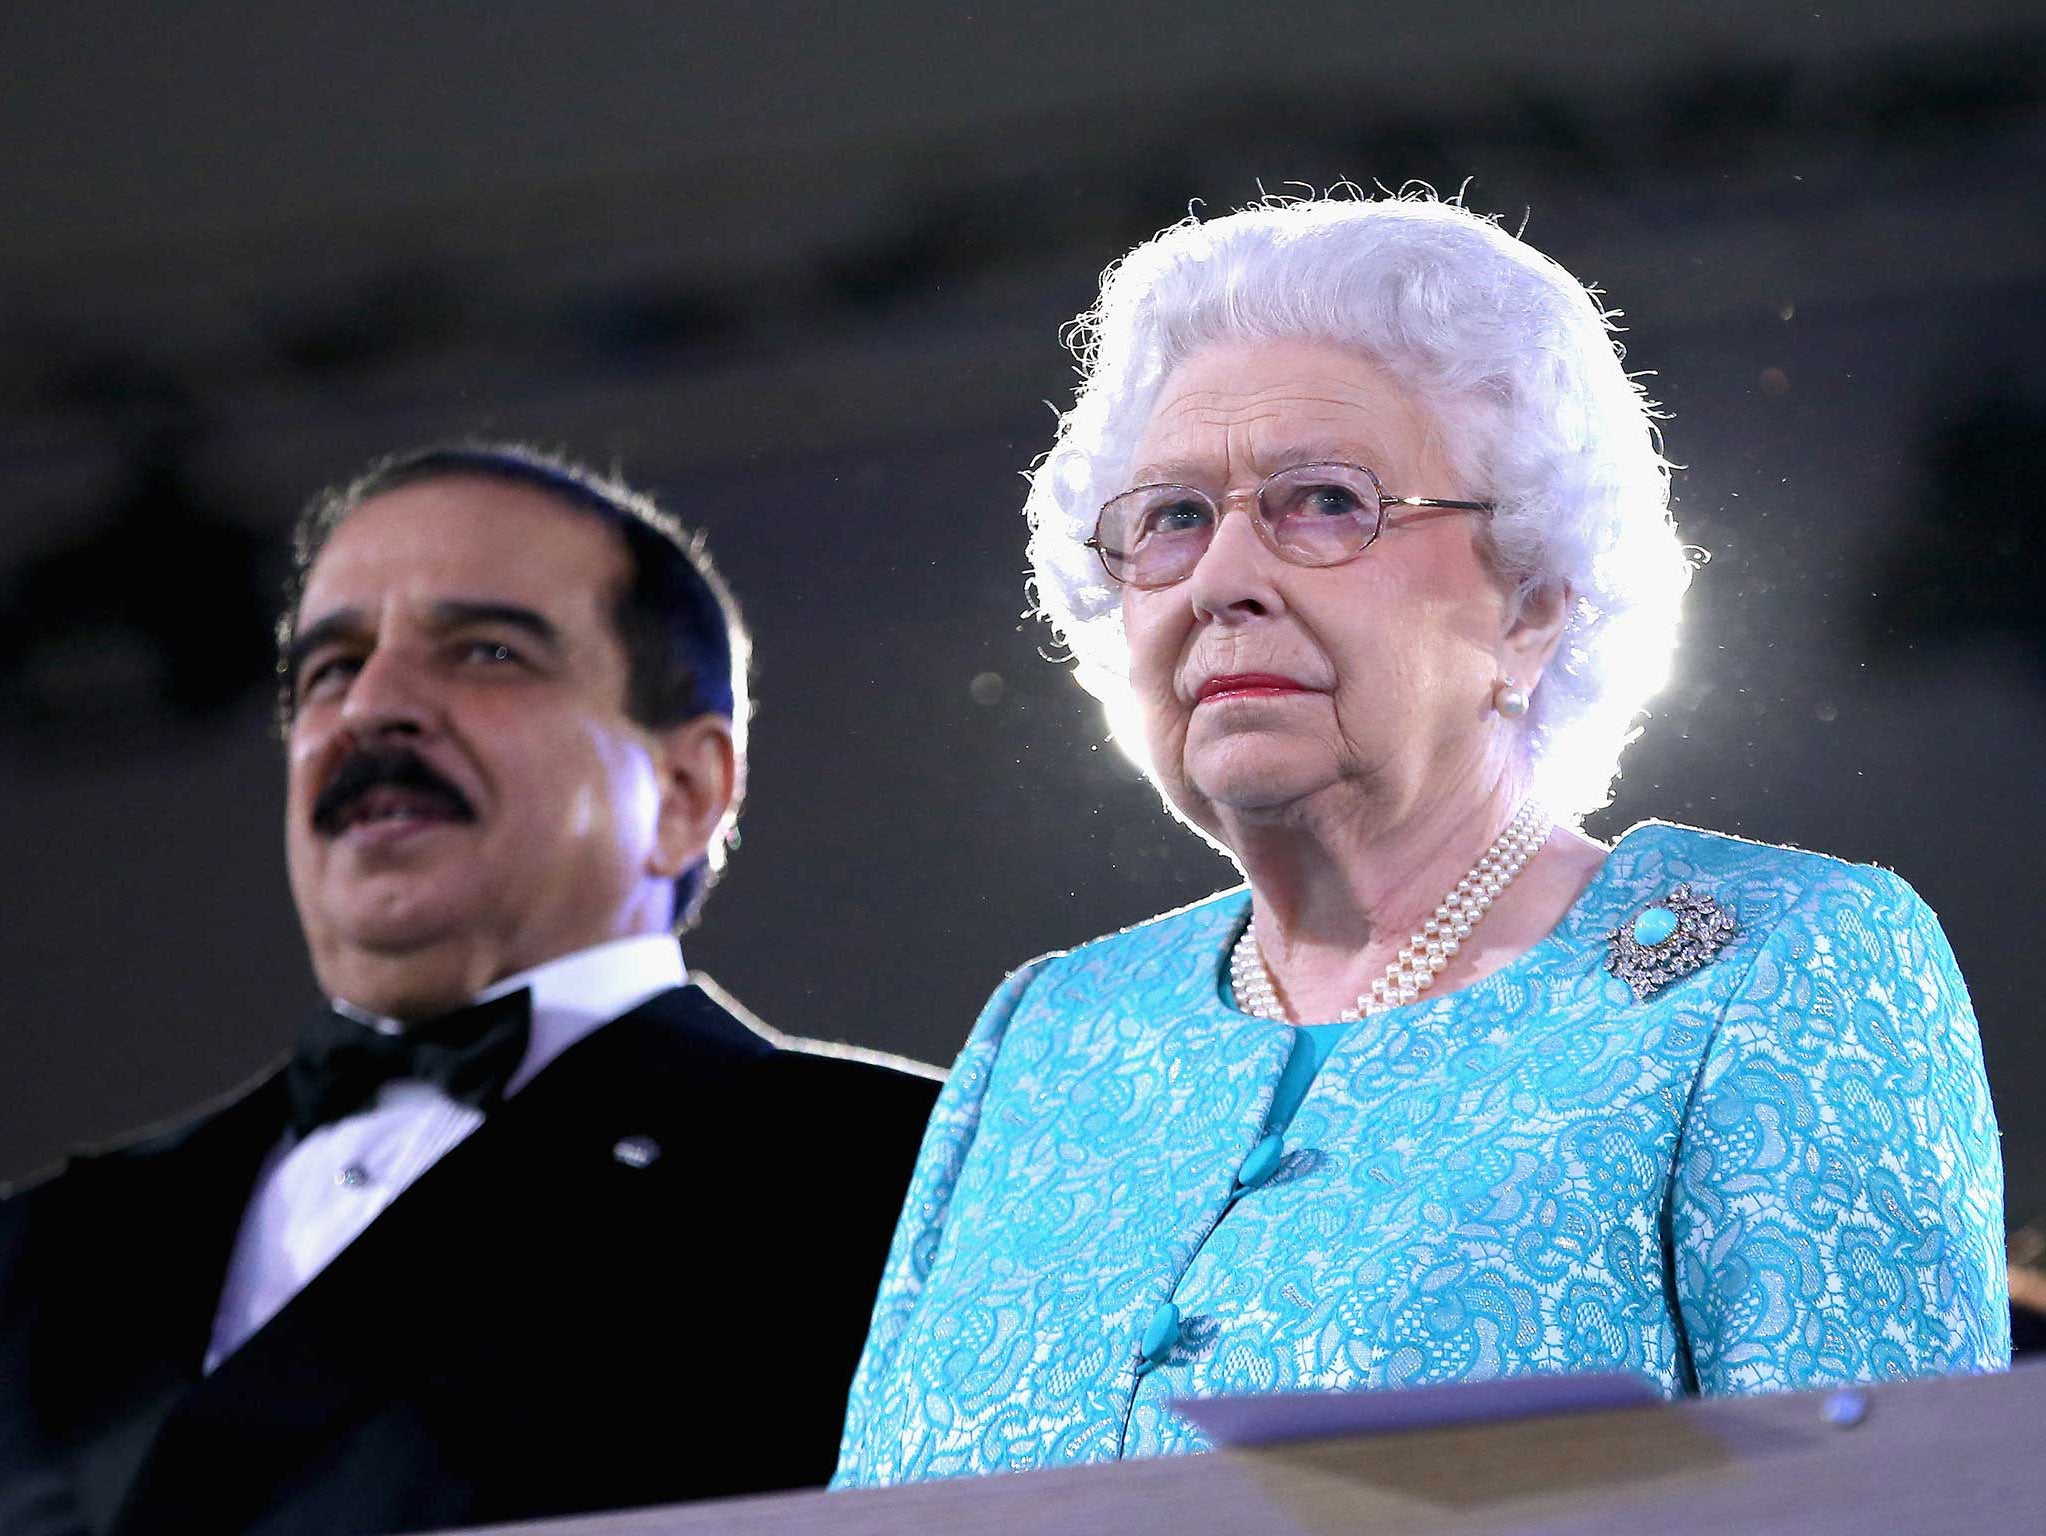 The Queen and the King of Bahrain at the Royal Windsor Horse Show